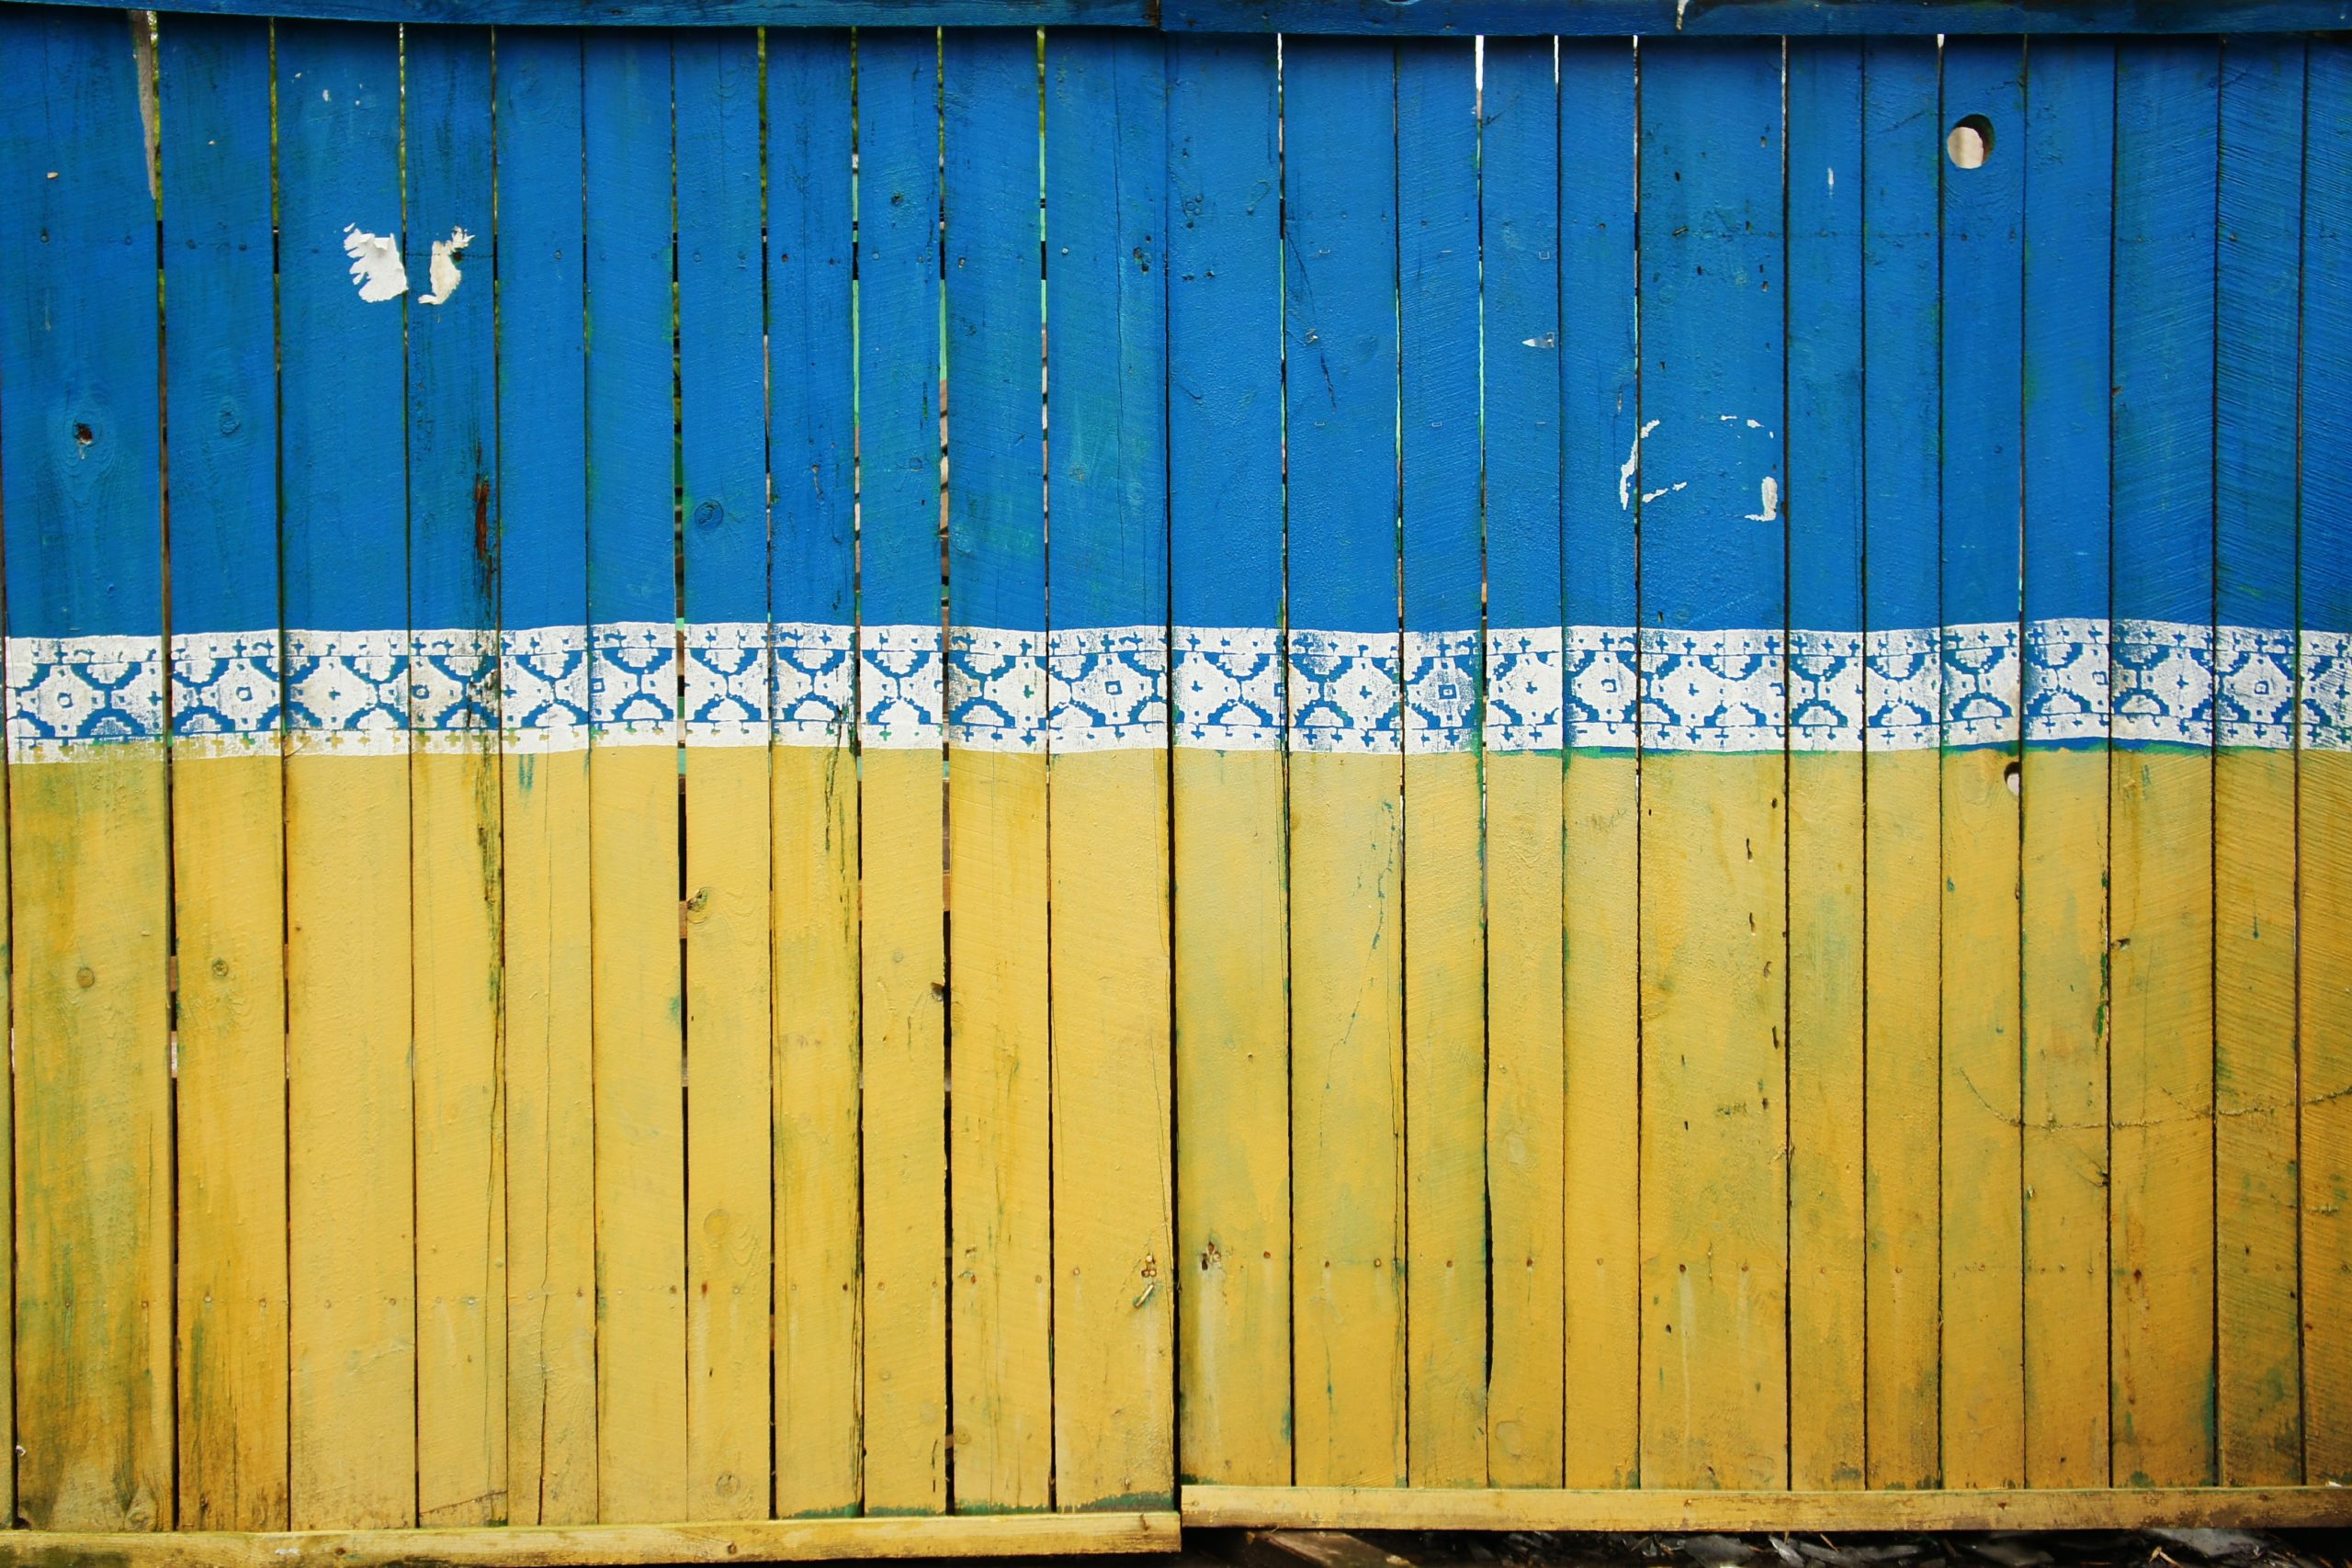 A fence painted in the colors of Ukraine symbolizing a common childhood play area of a fence, with the Ukrainian colors present as well.